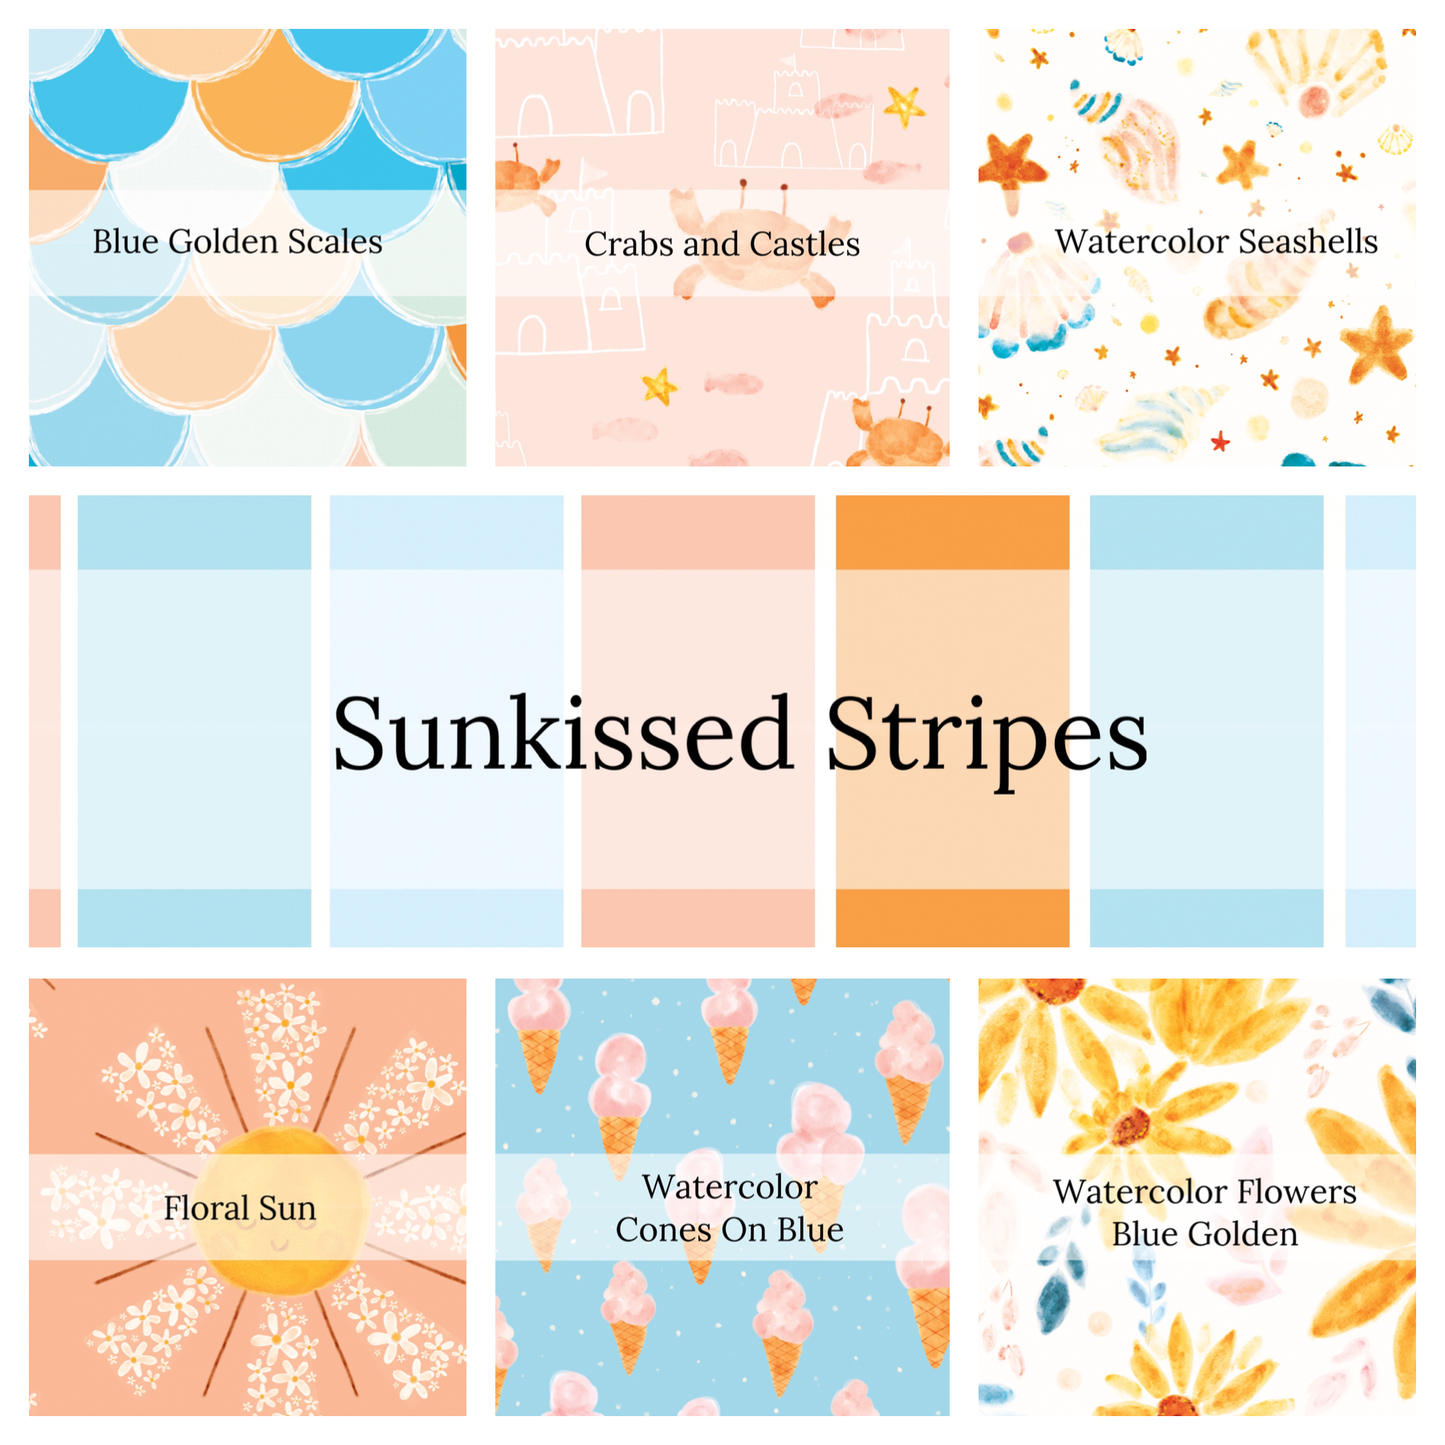 Summer themed high quality fabric adaptable for all your crafting needs. Make cute baby headwraps, fun girl hairbows, knotted headbands for adults or kids, clothing, and more!